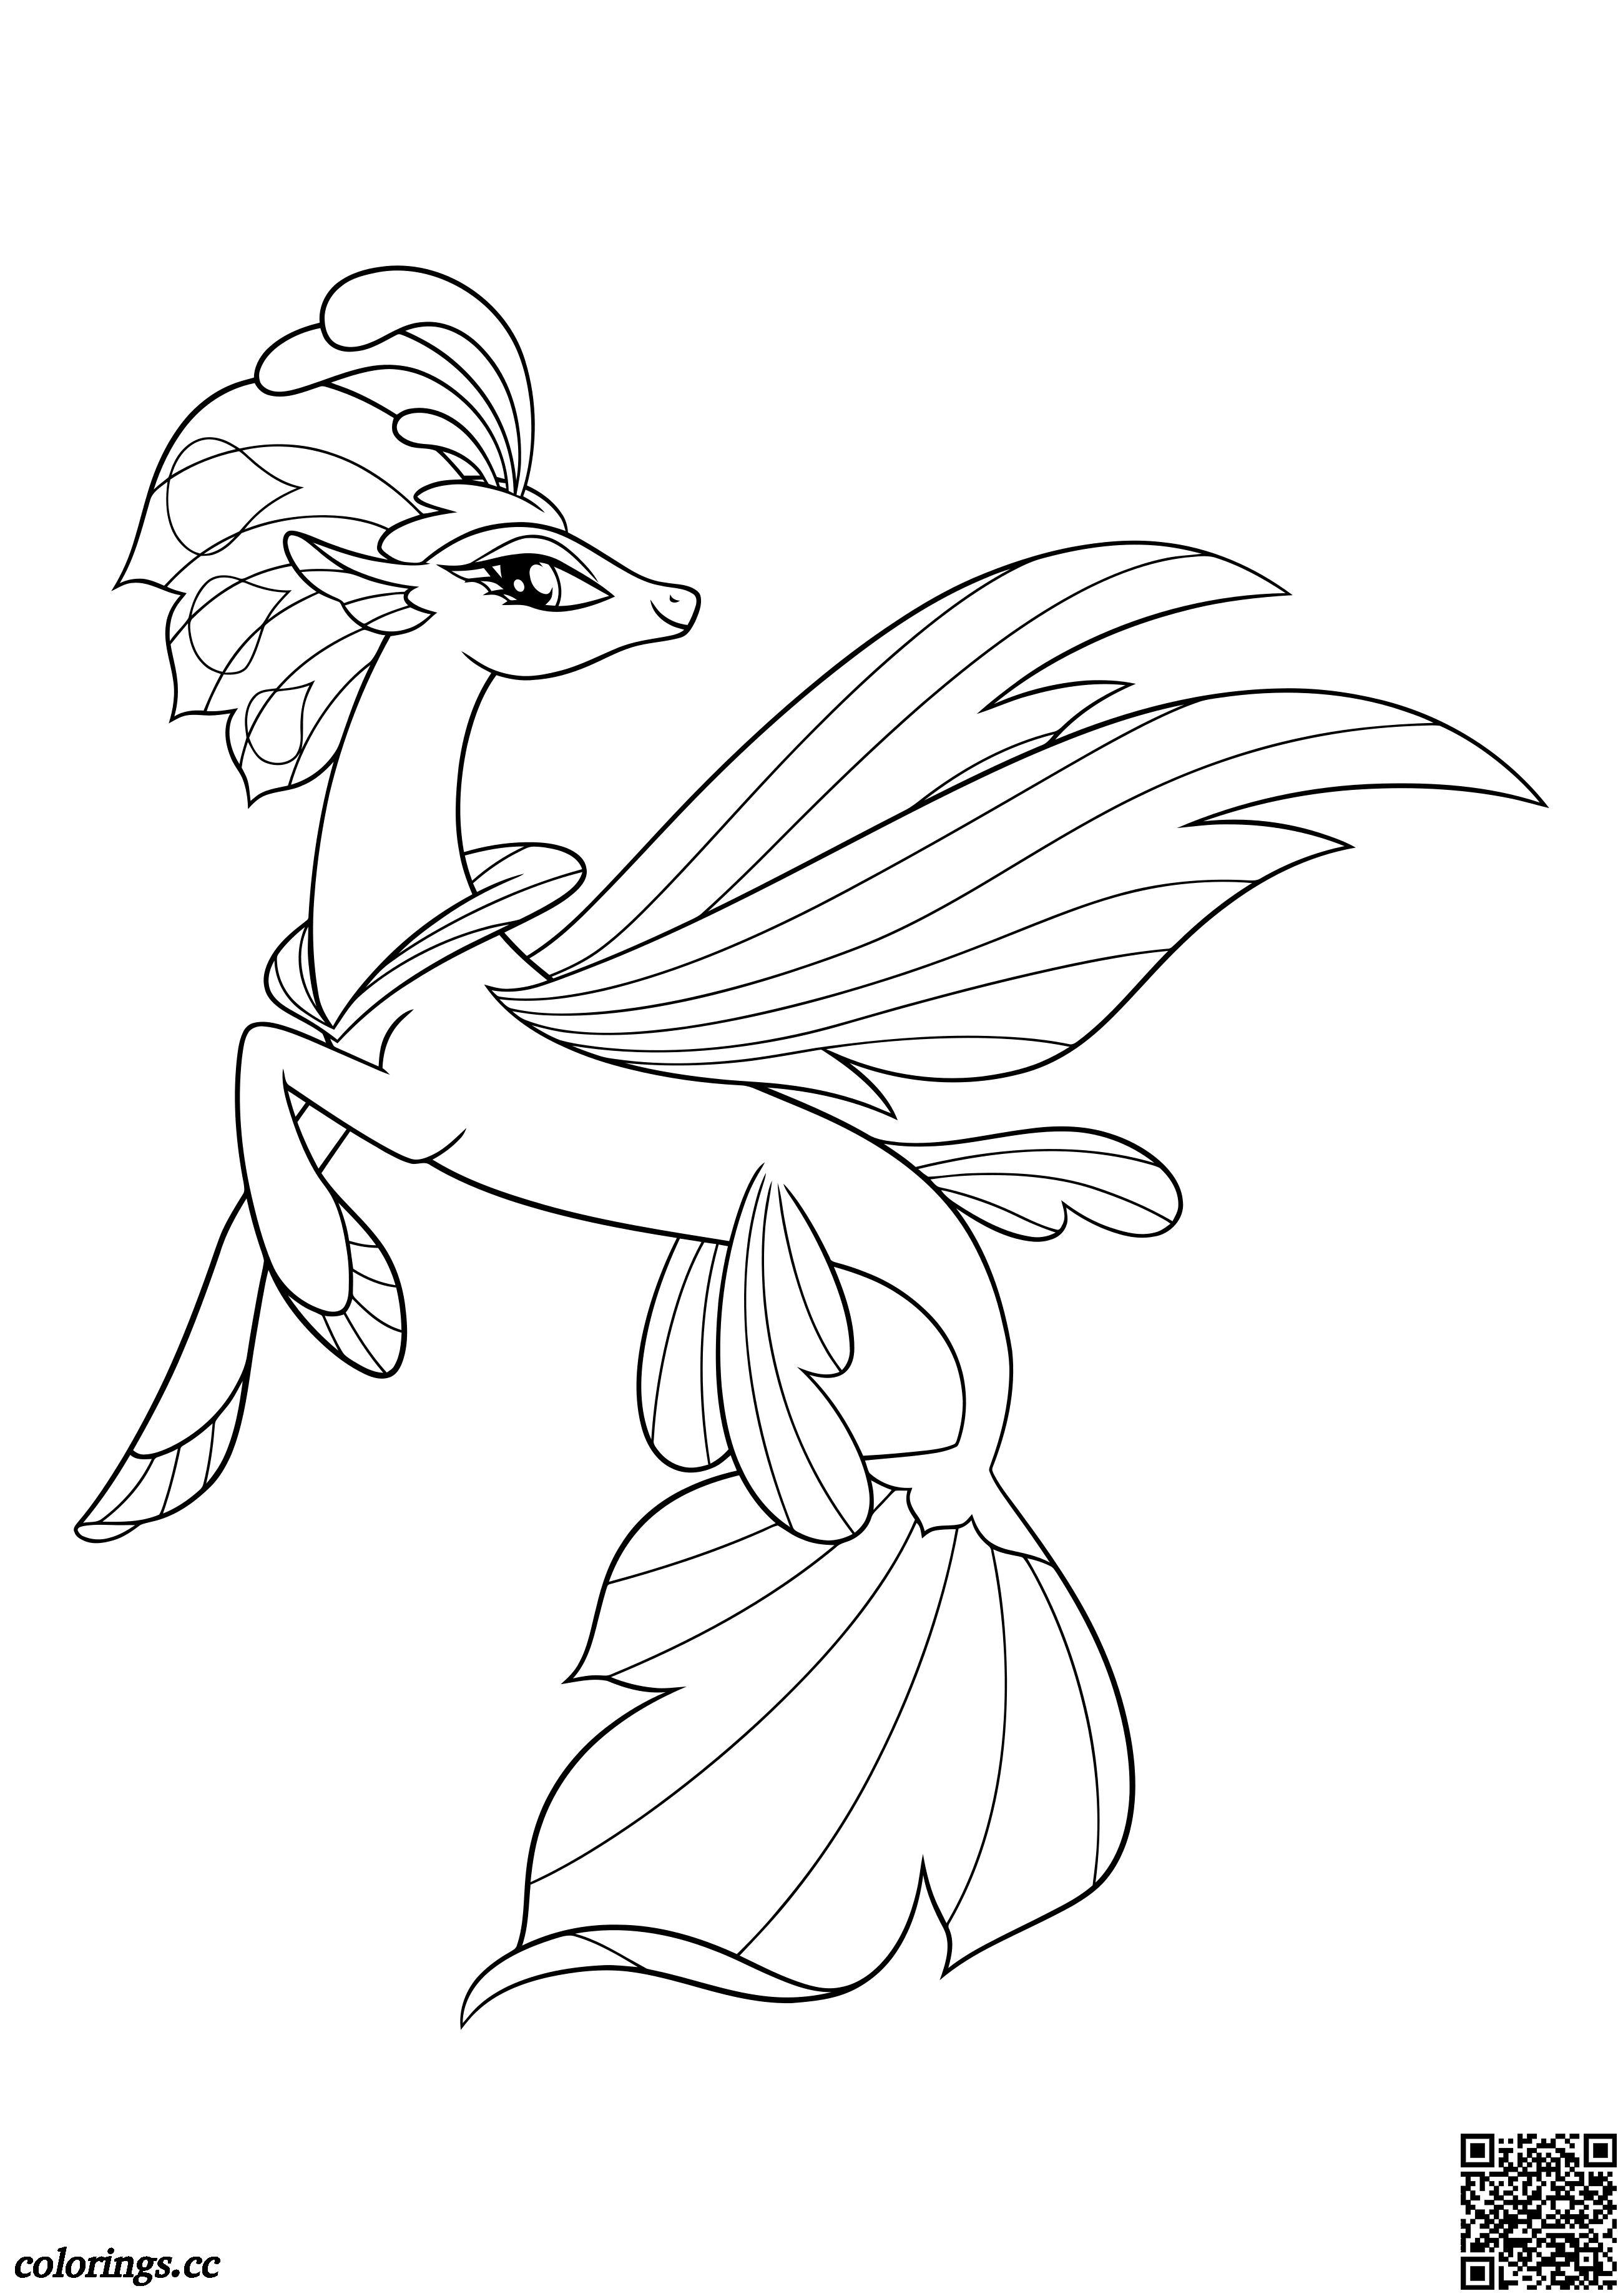 Queen Novo coloring pages, My little pony movie coloring pages ...